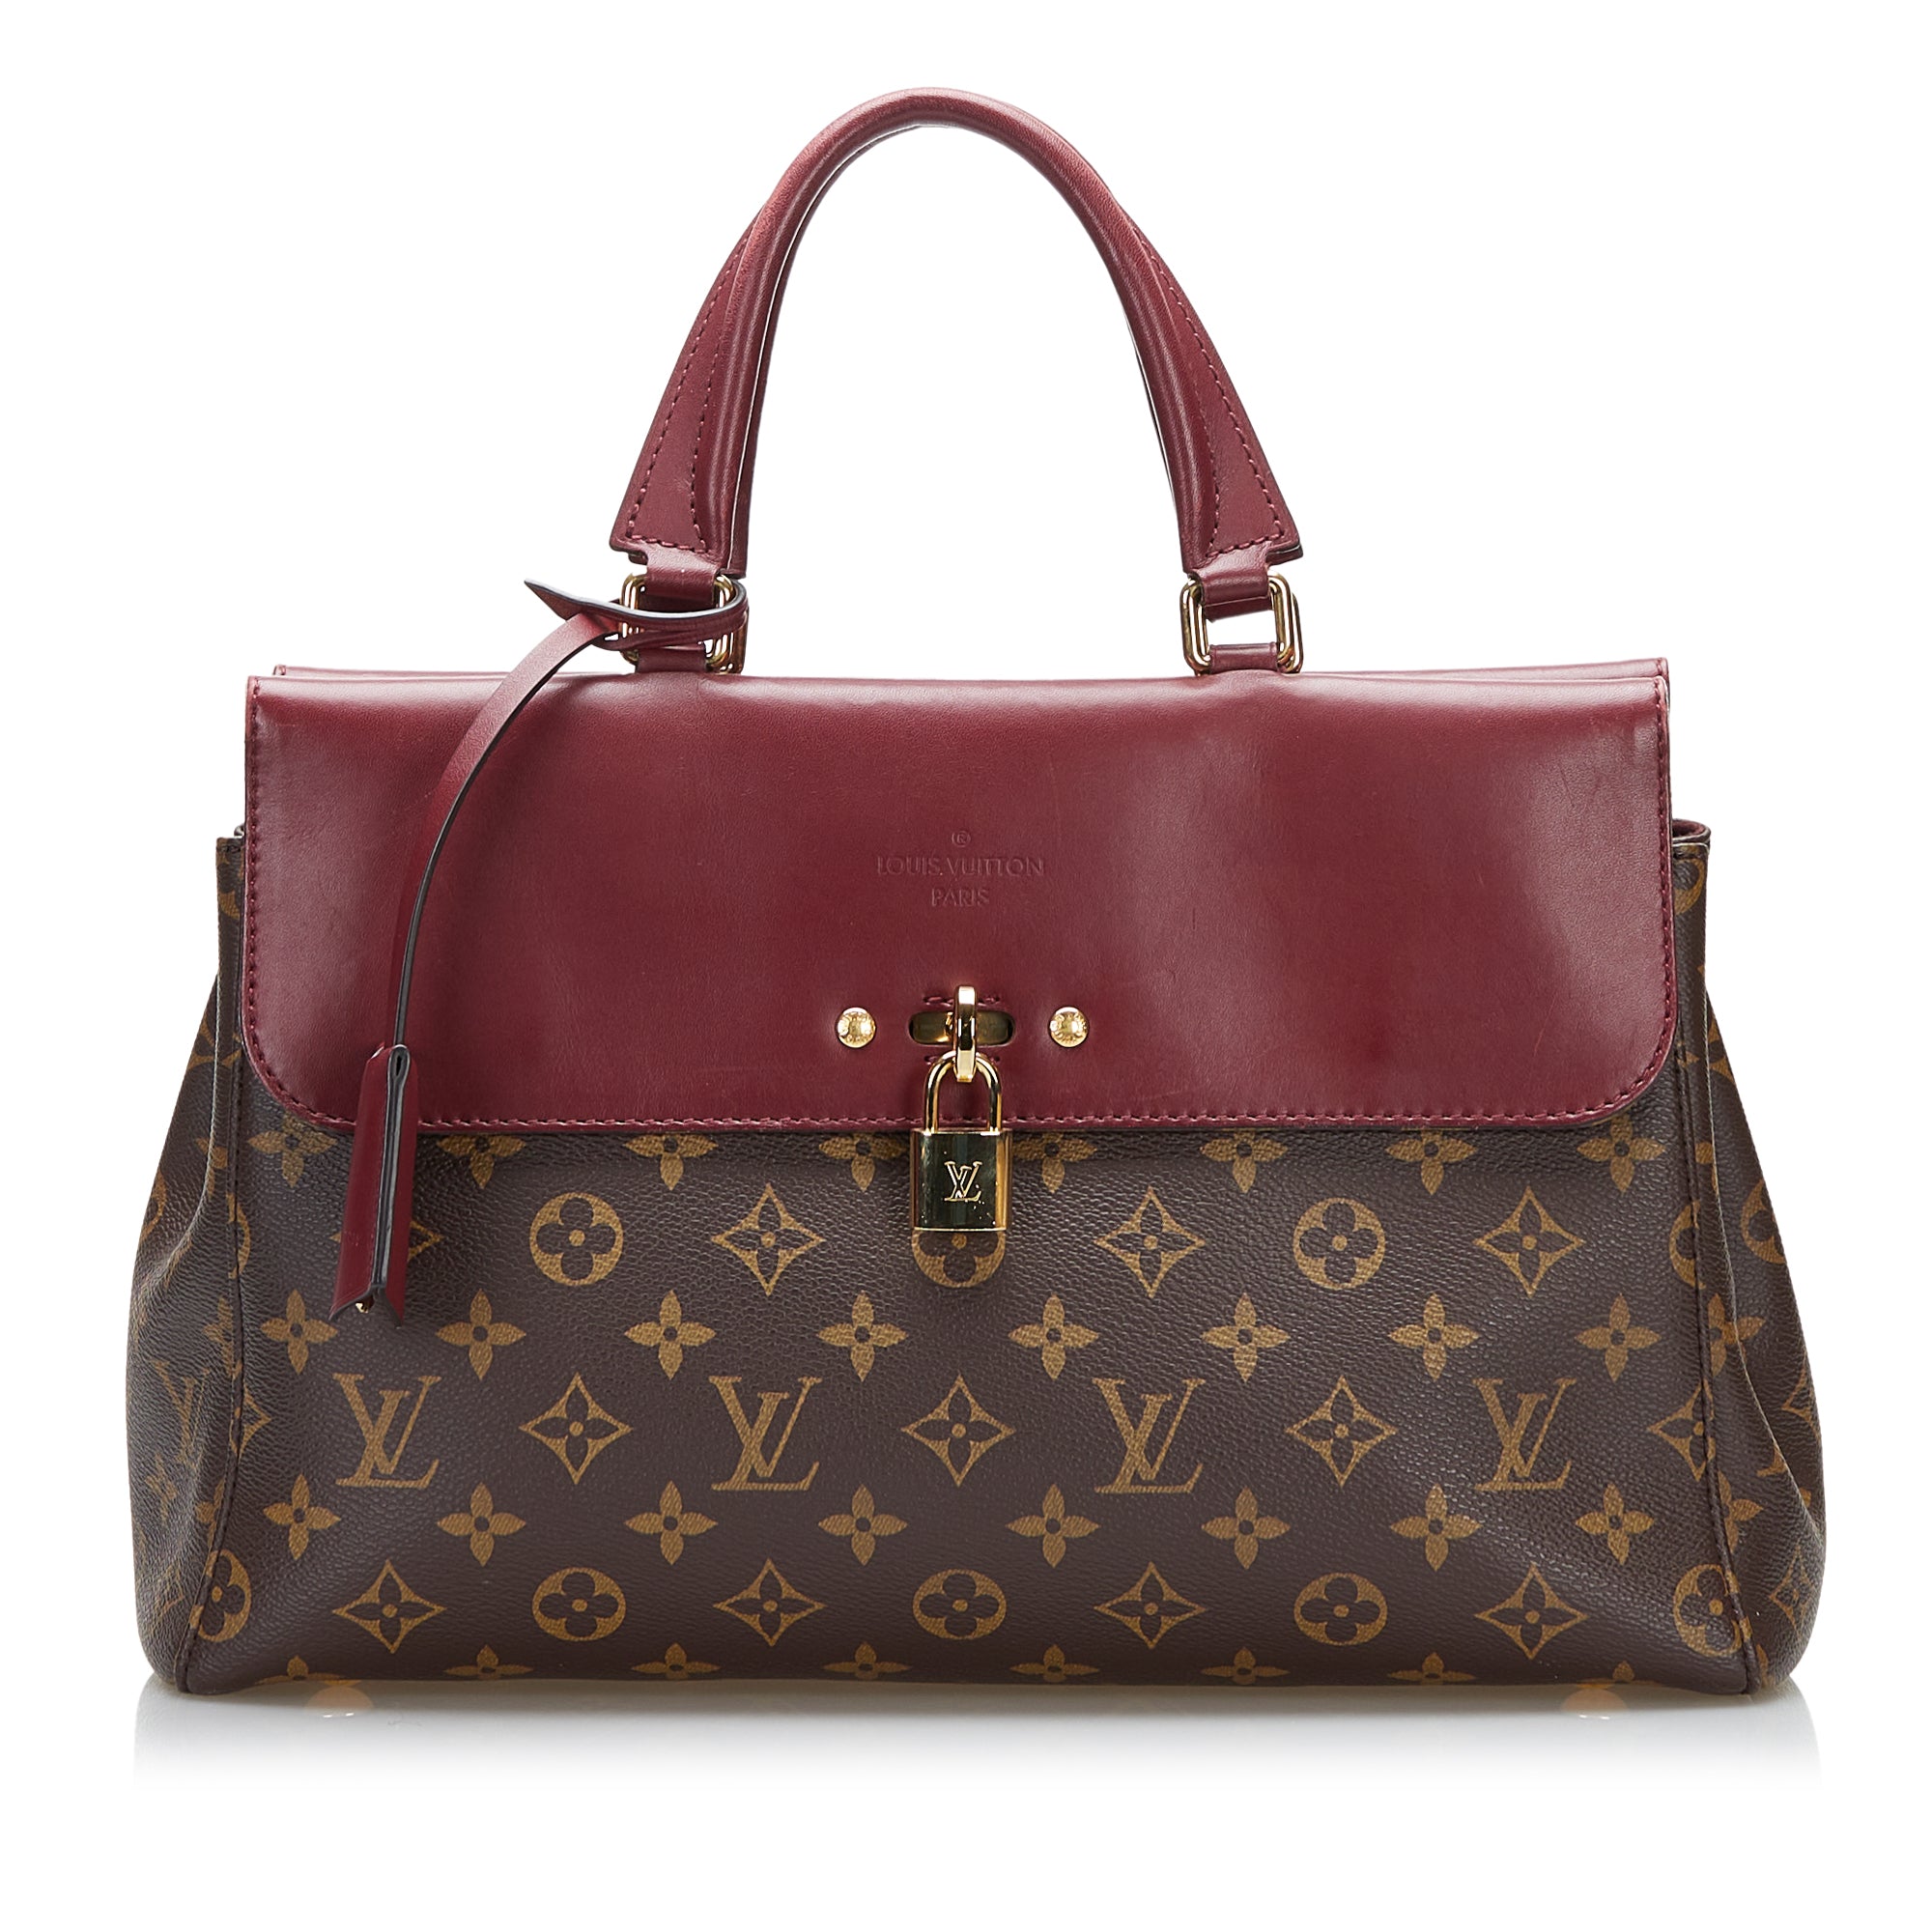 red and brown louis vuitton bag